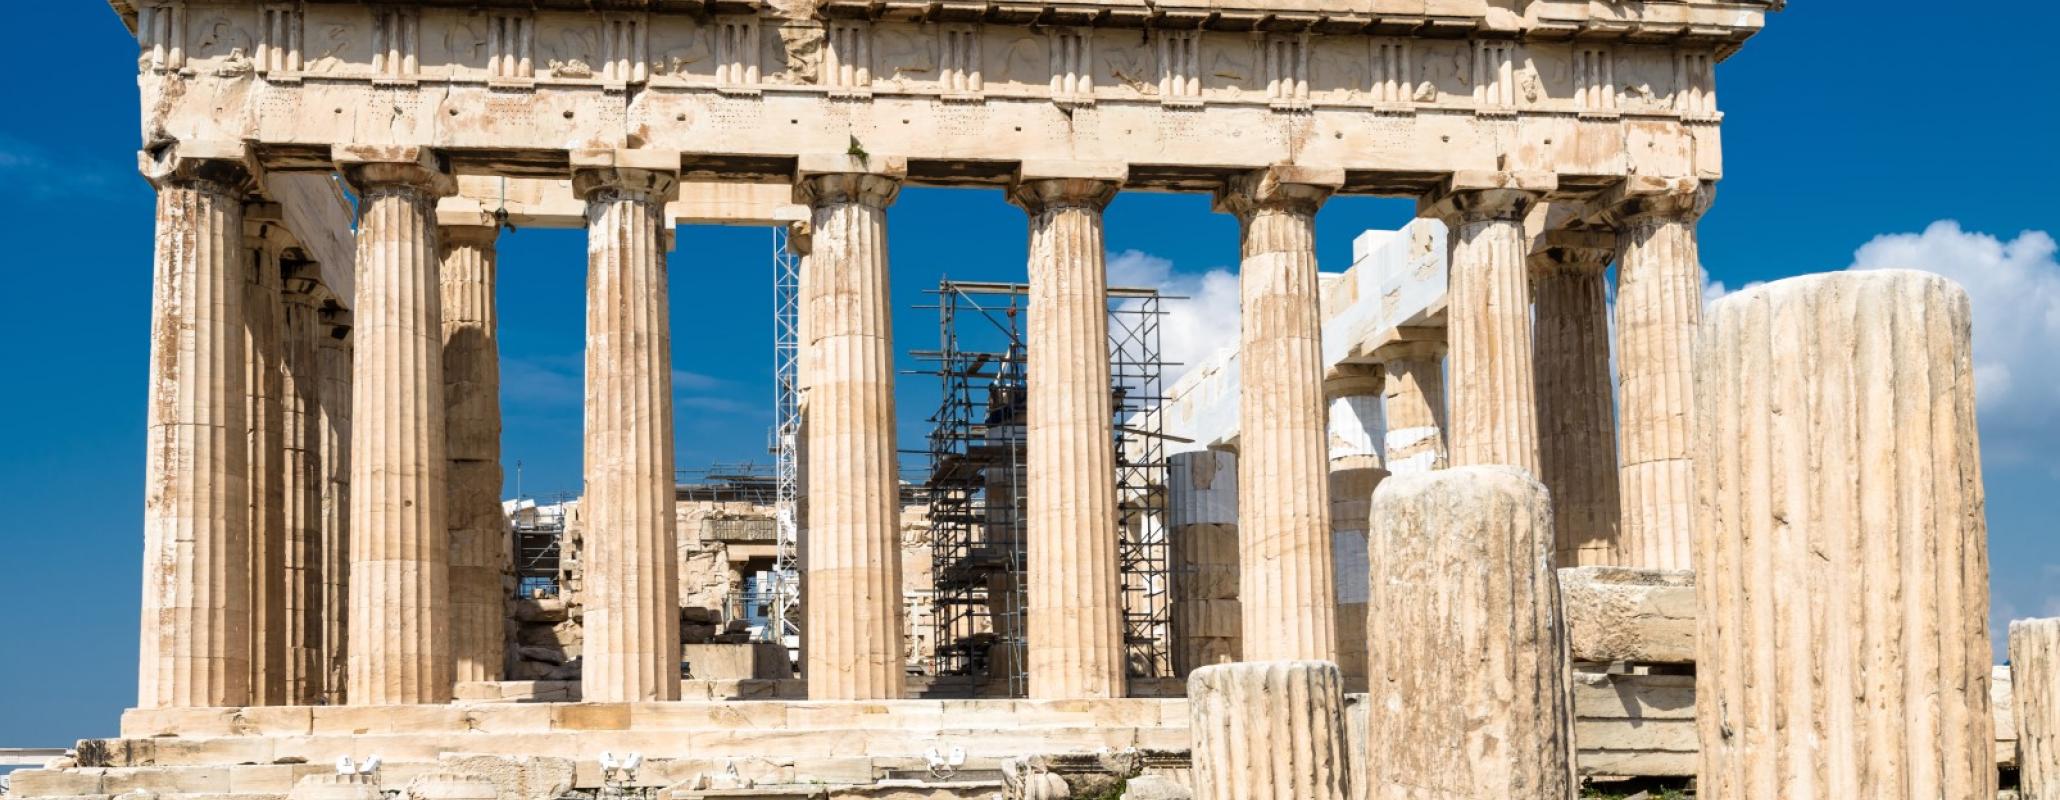 Athens Full Day Private Tour (Acropolis, Syntagma and more)